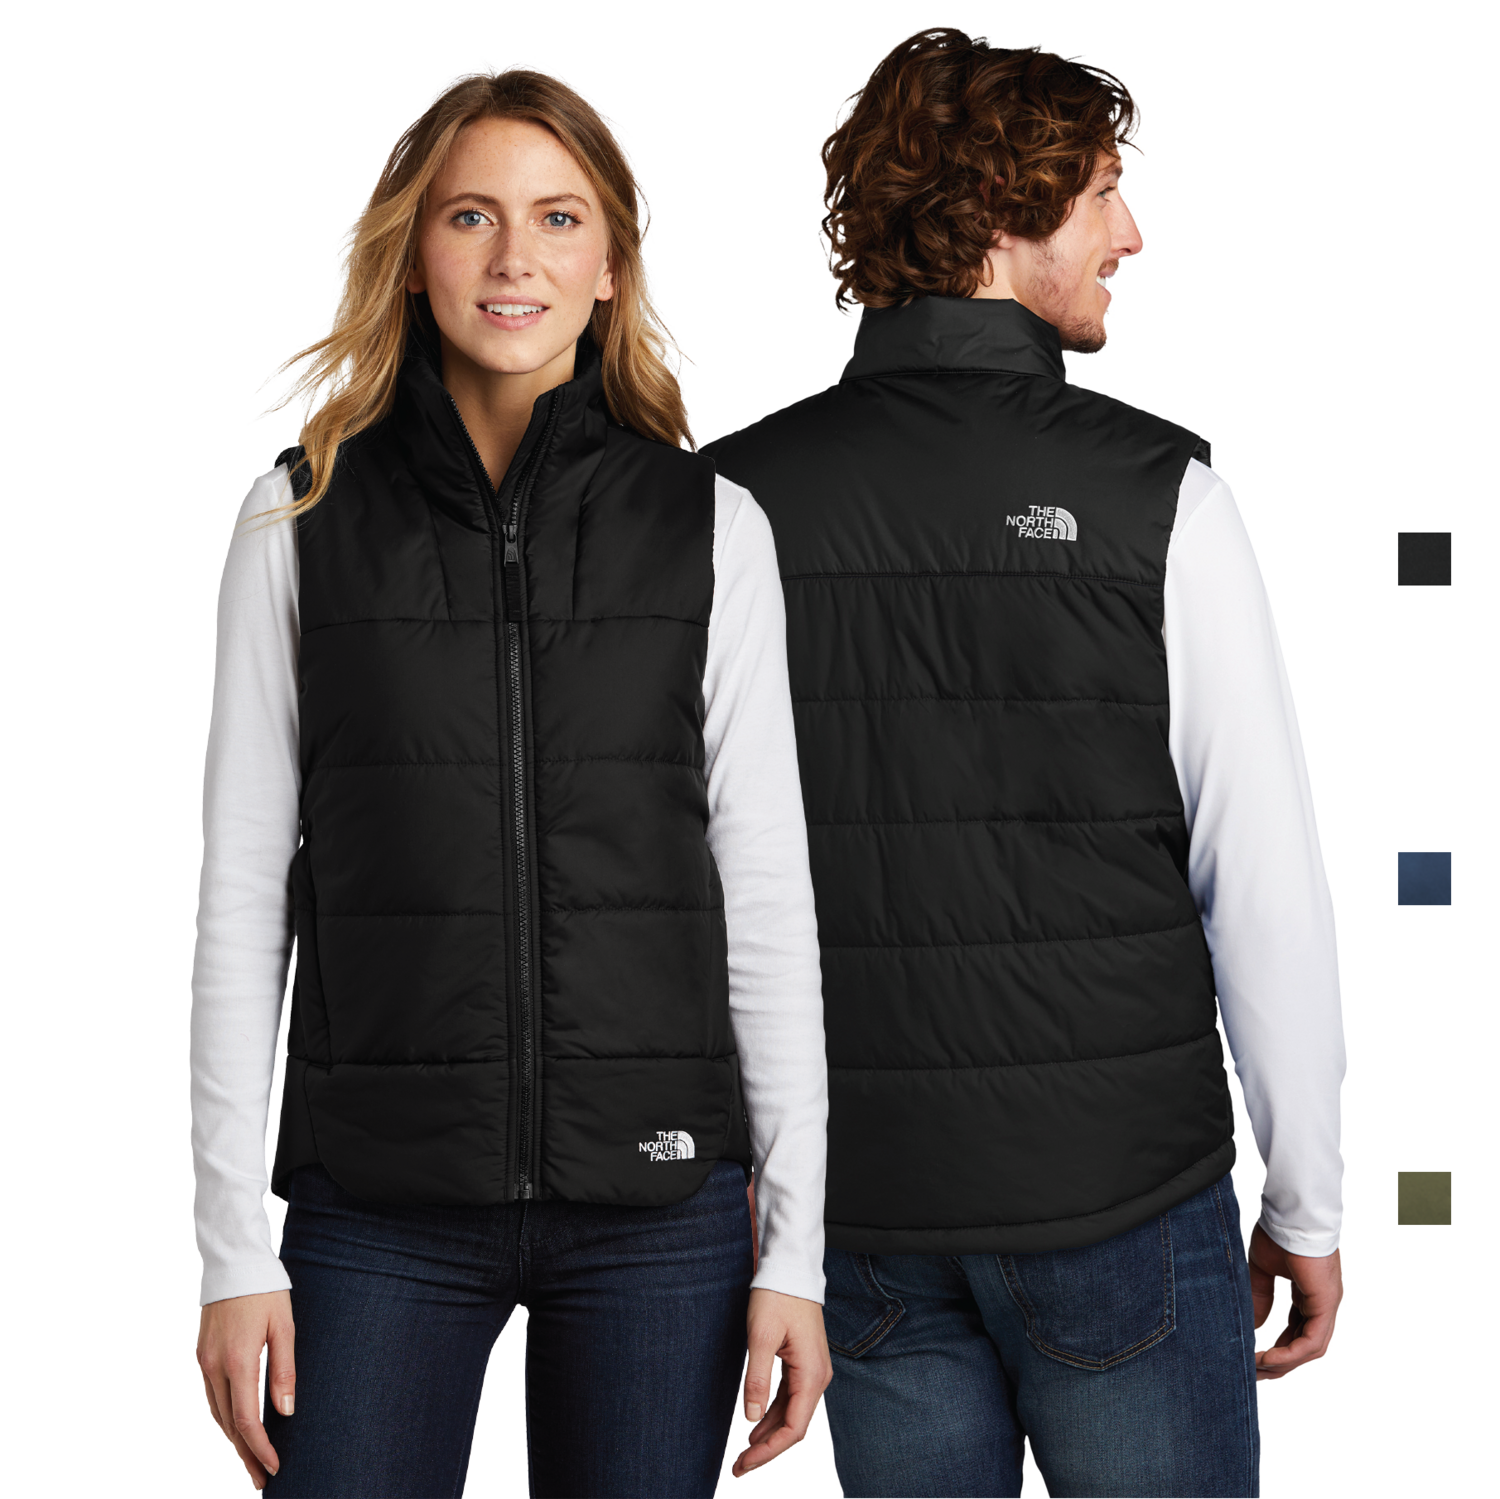 The North Face Everyday Insulated Vest - Men's and Ladies